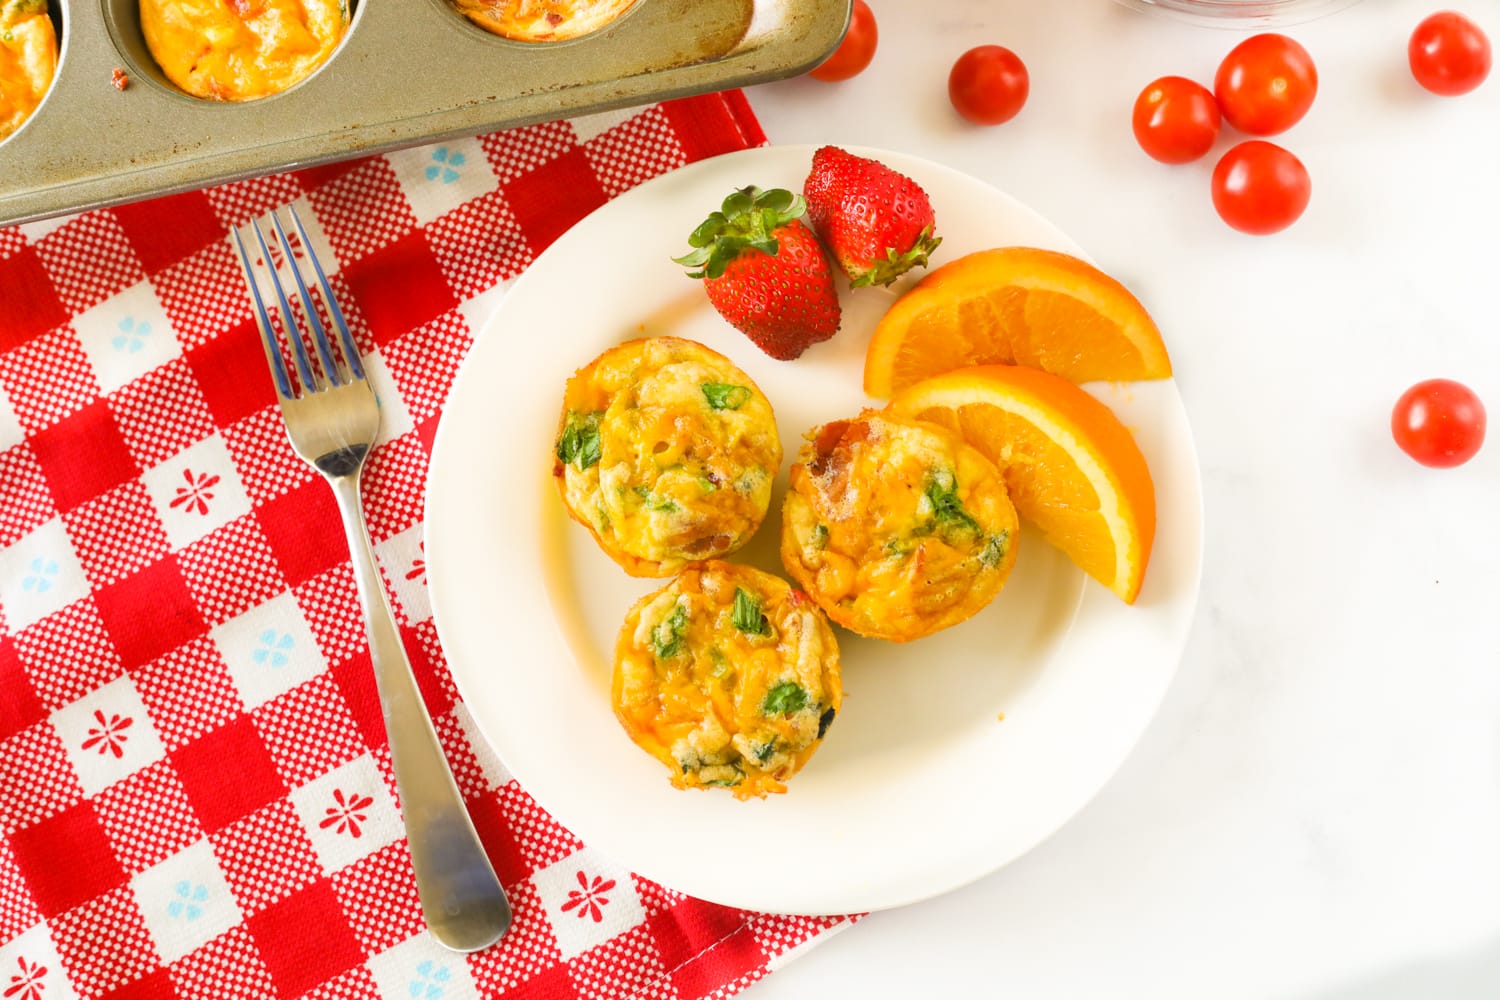 Baked egg muffins on a plate